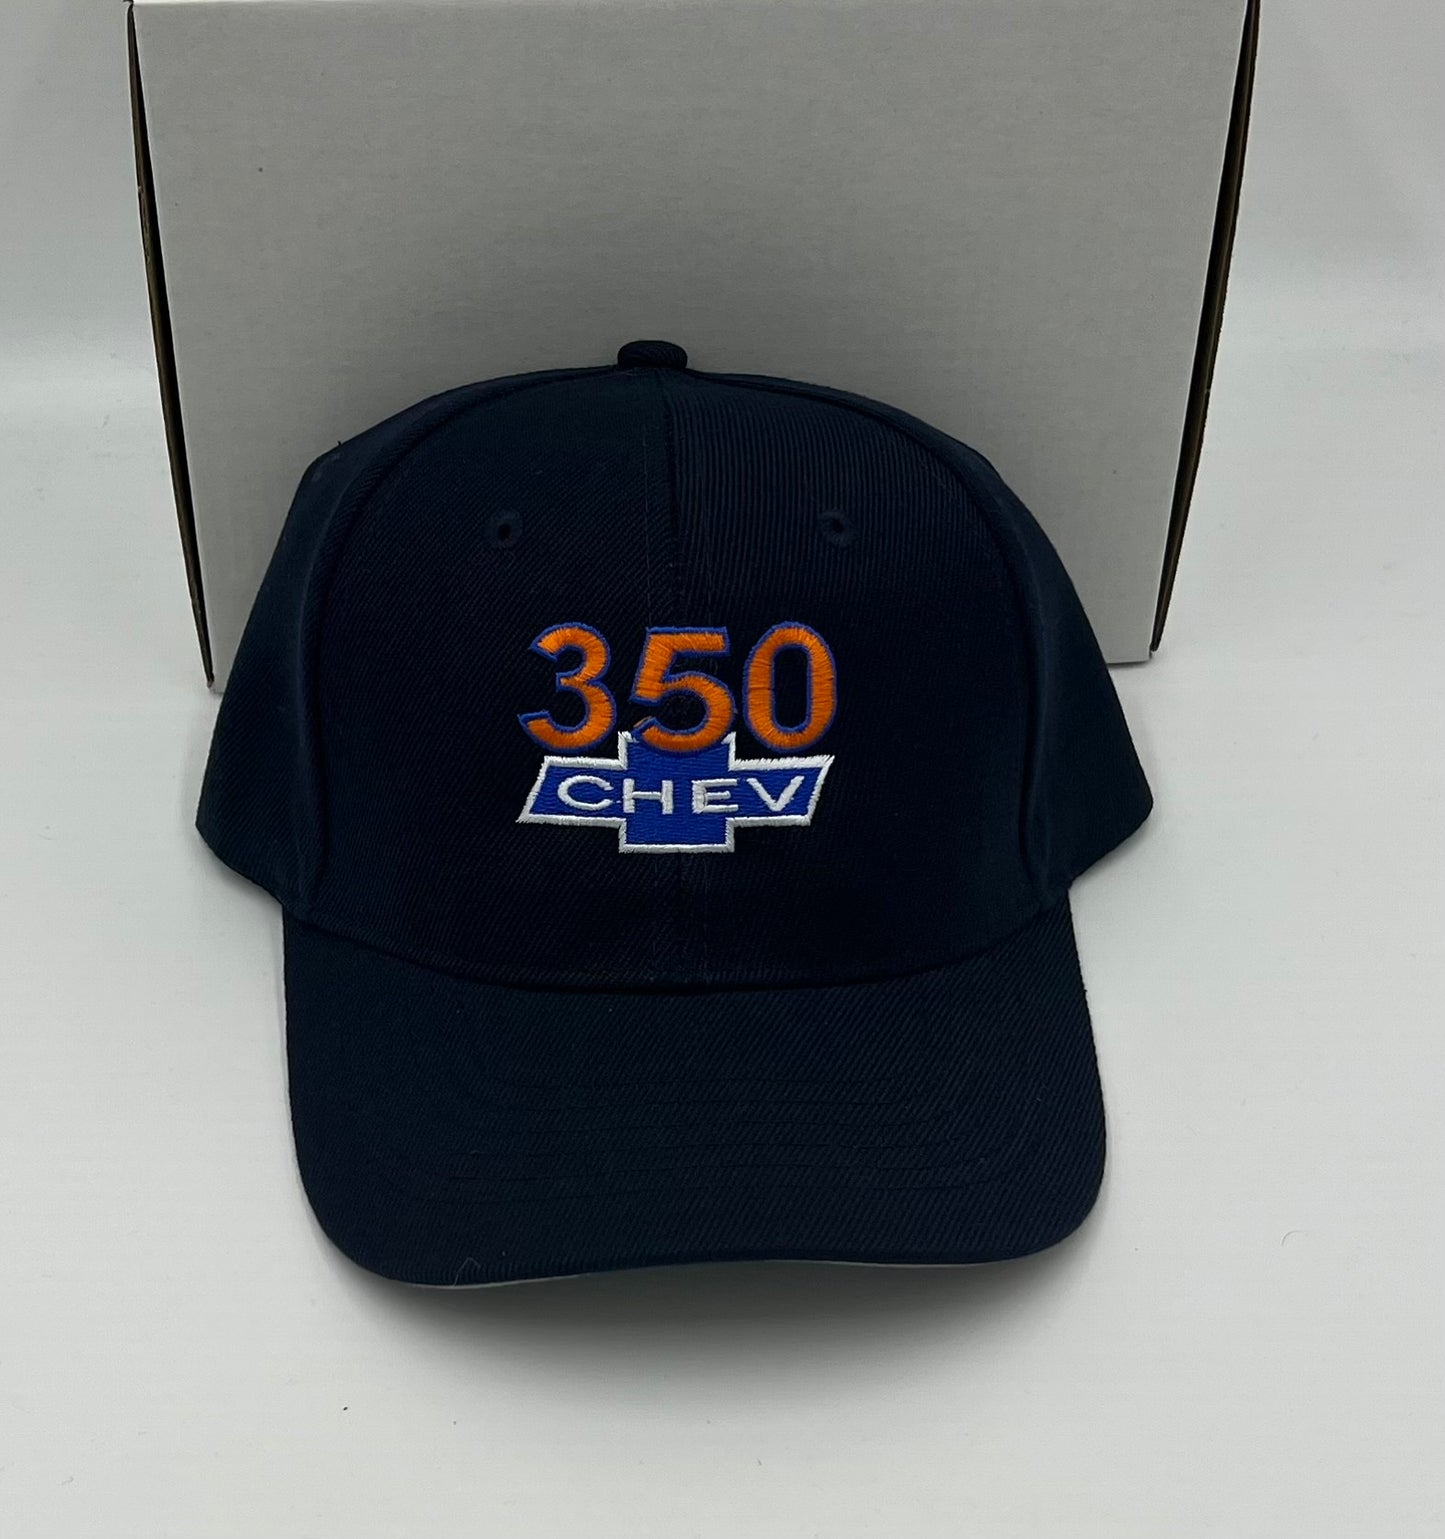 350 Chev Embroidered Hat